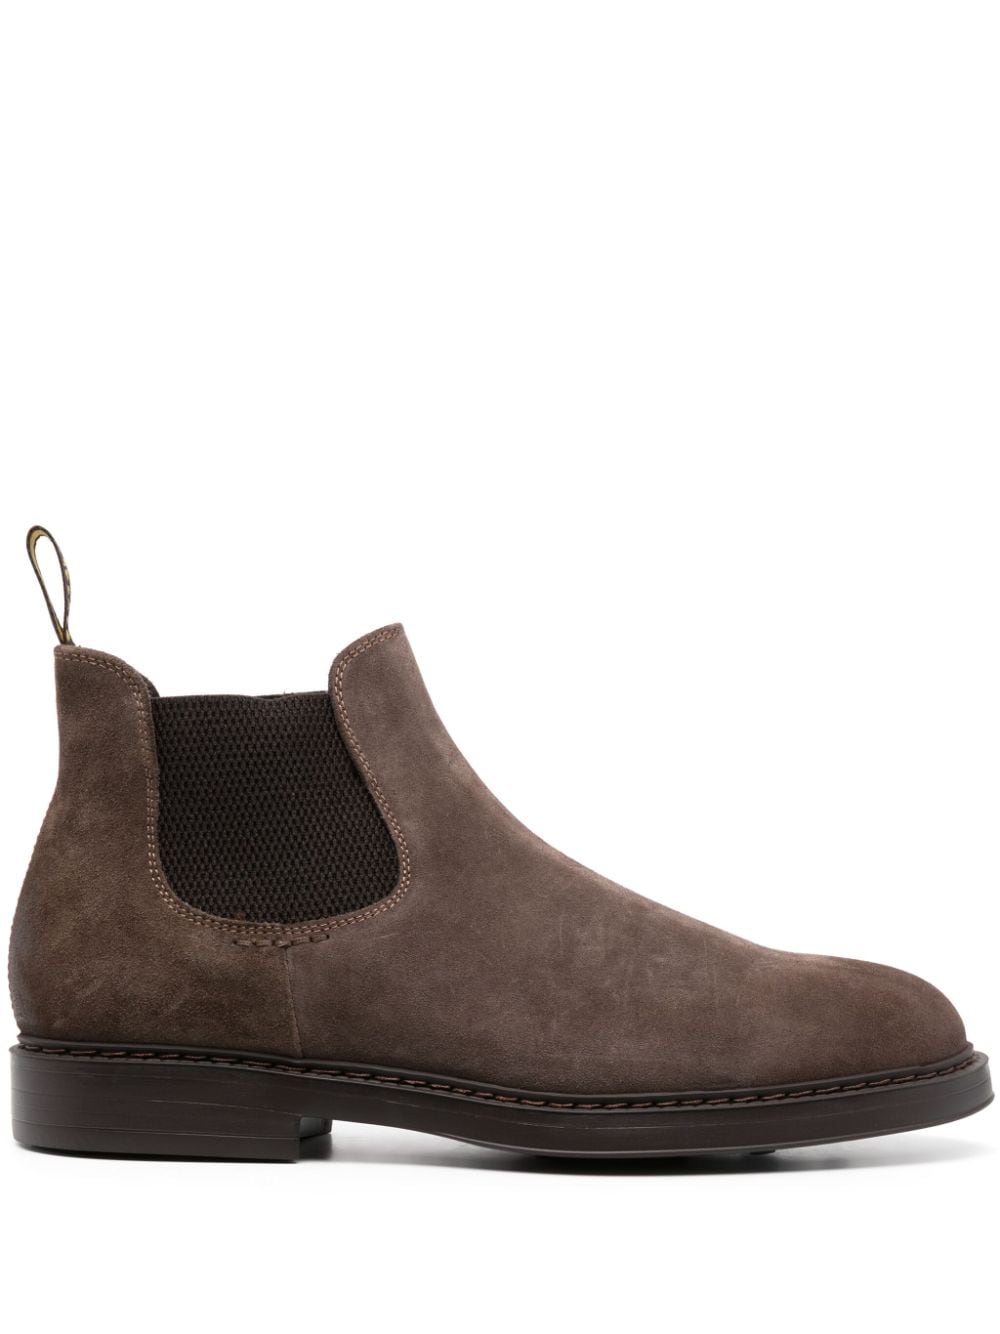 slip-on suede Chelsea boots